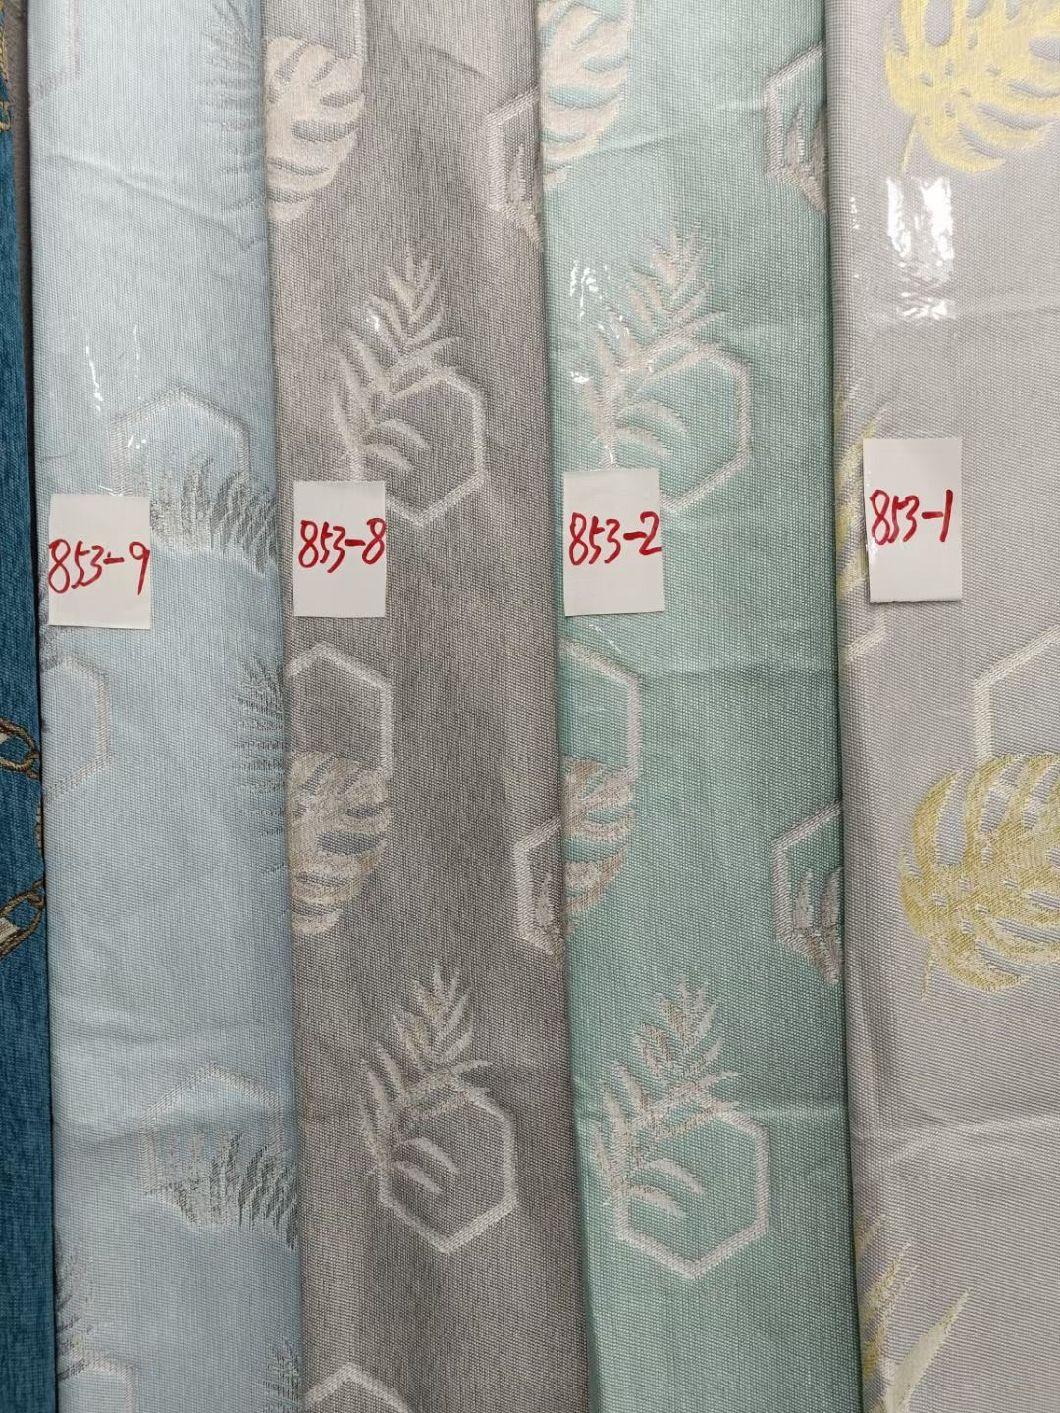 Curtain Fabric Sale Sofa Fabric for Furniture Stripe Cooling Leaf Pattern Supplier Factory Manufacturer